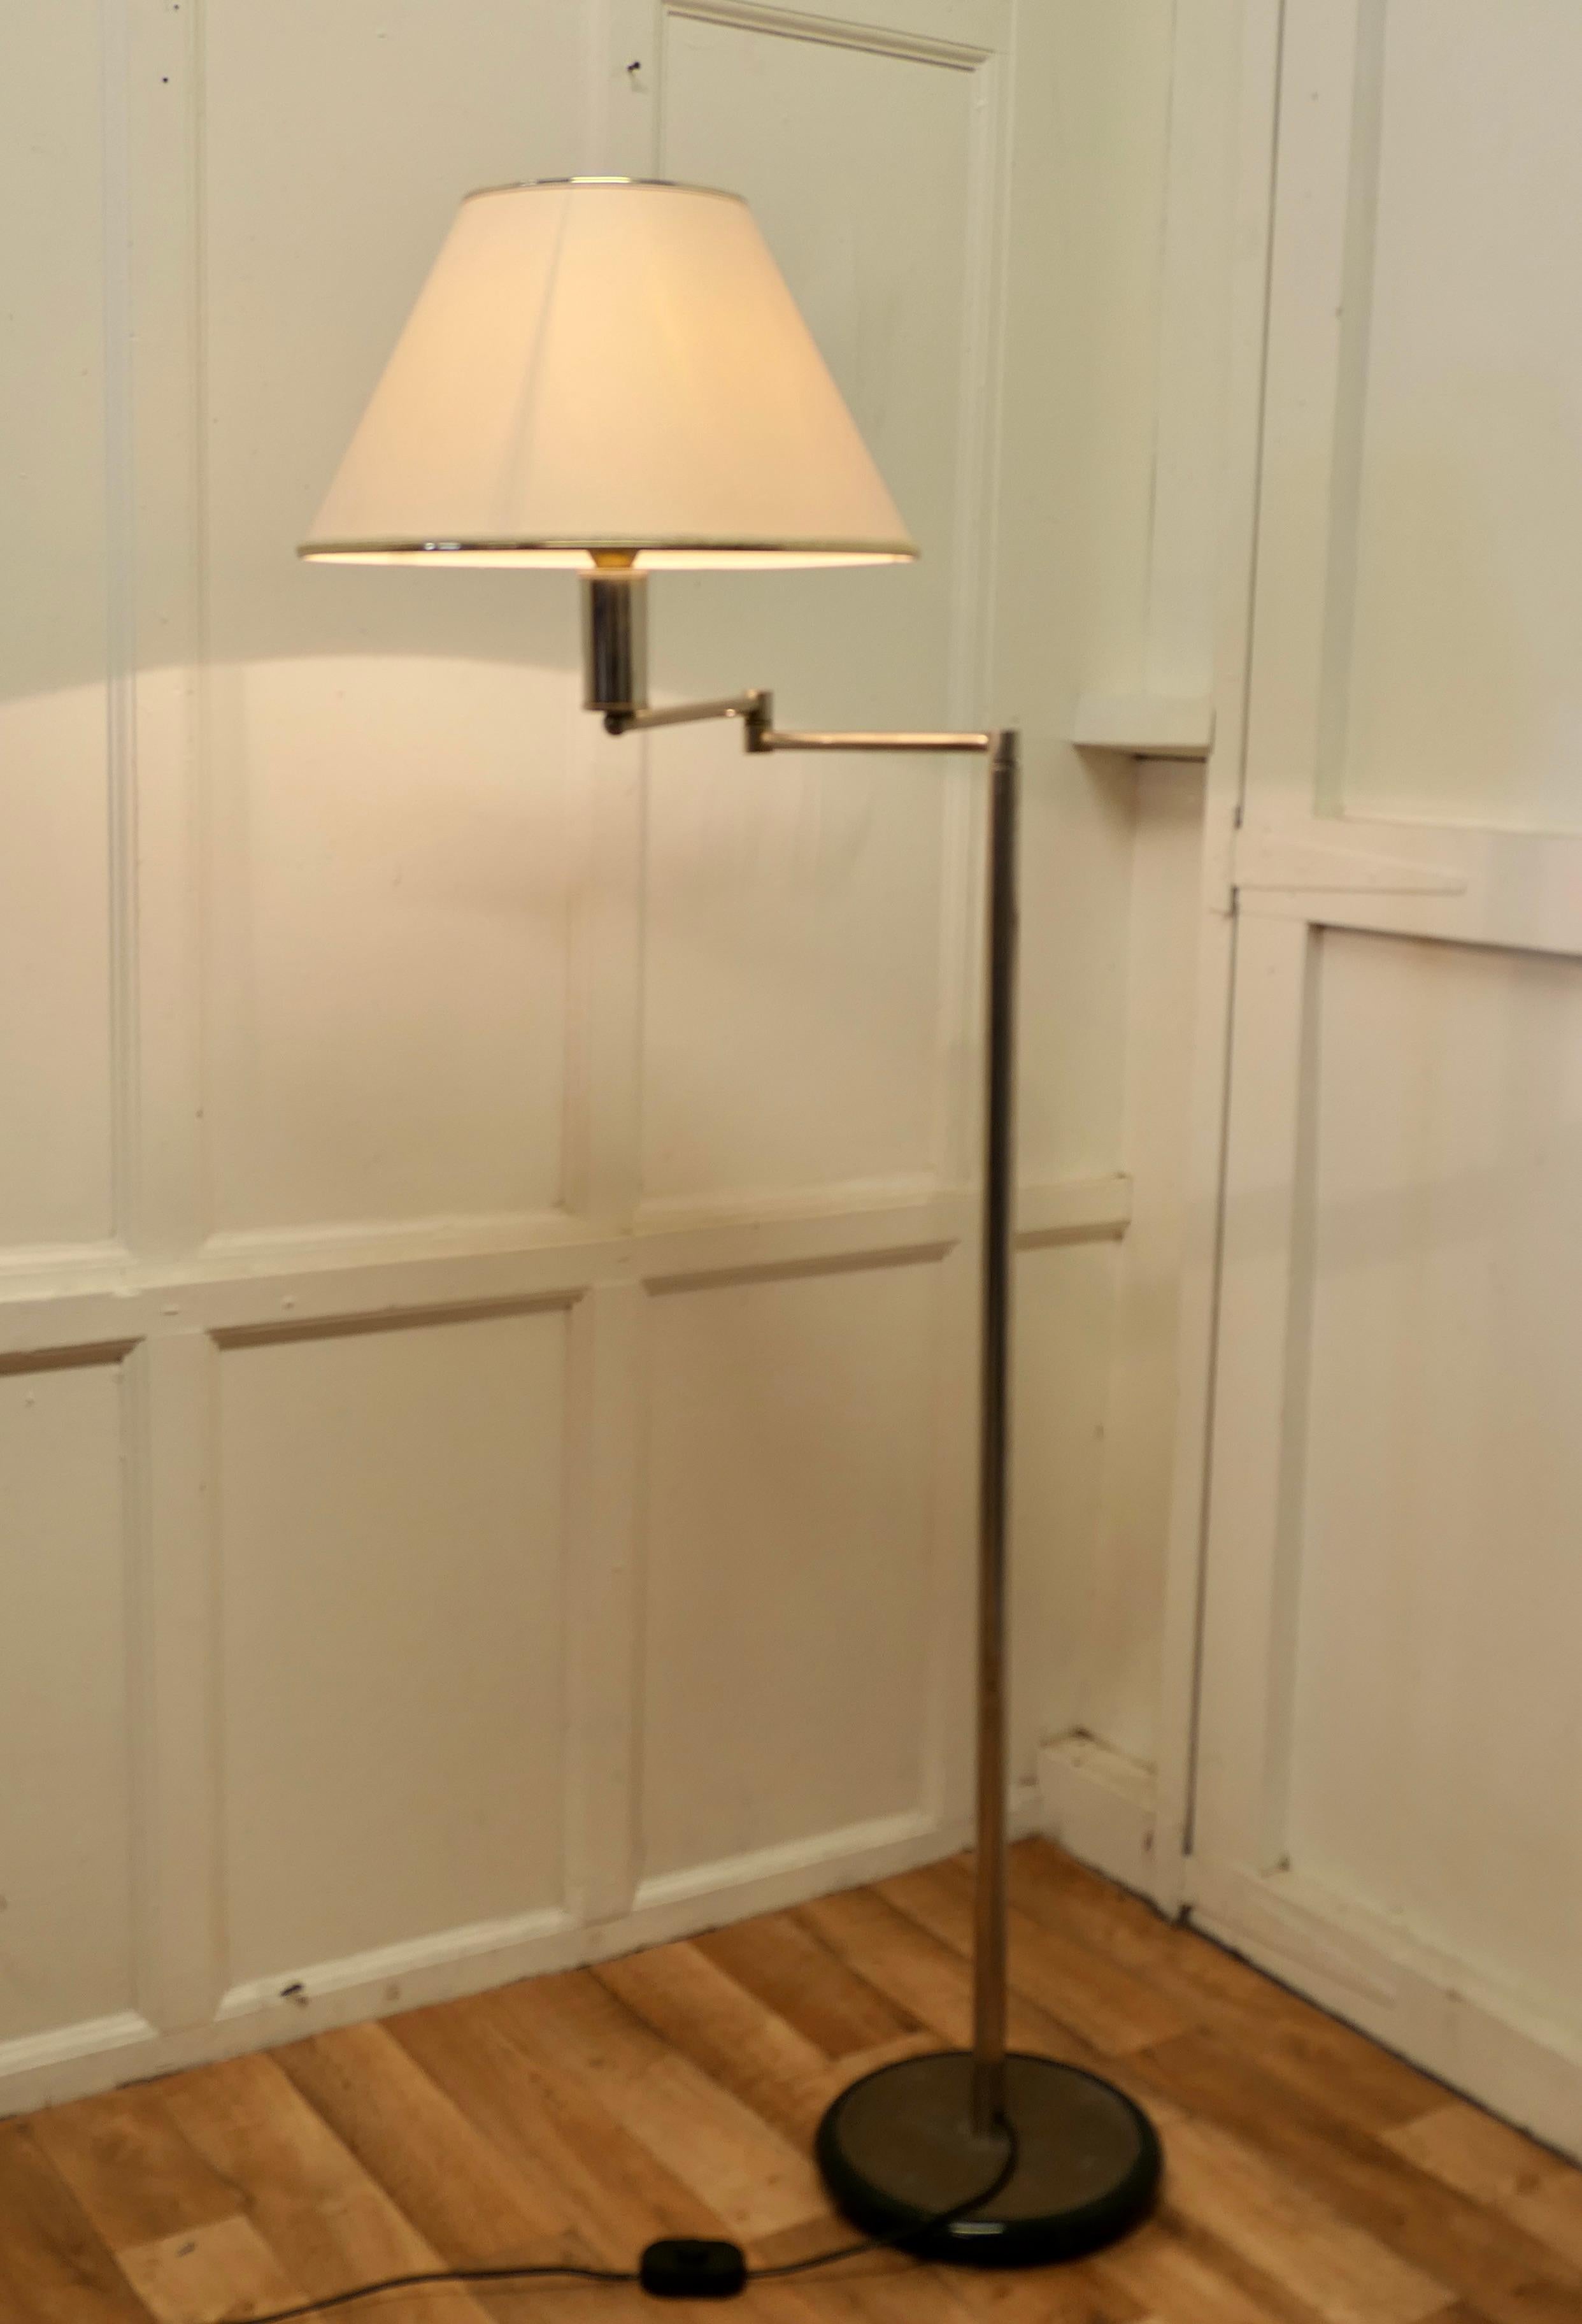 French Art Deco Adjustable swing arm chrome and brass floor lamp

This is an unusual piece, the lamp has a heavy brass base which supports a chrome column with an adjustable Swing Arm on a full height column, this can be moved to adjust the